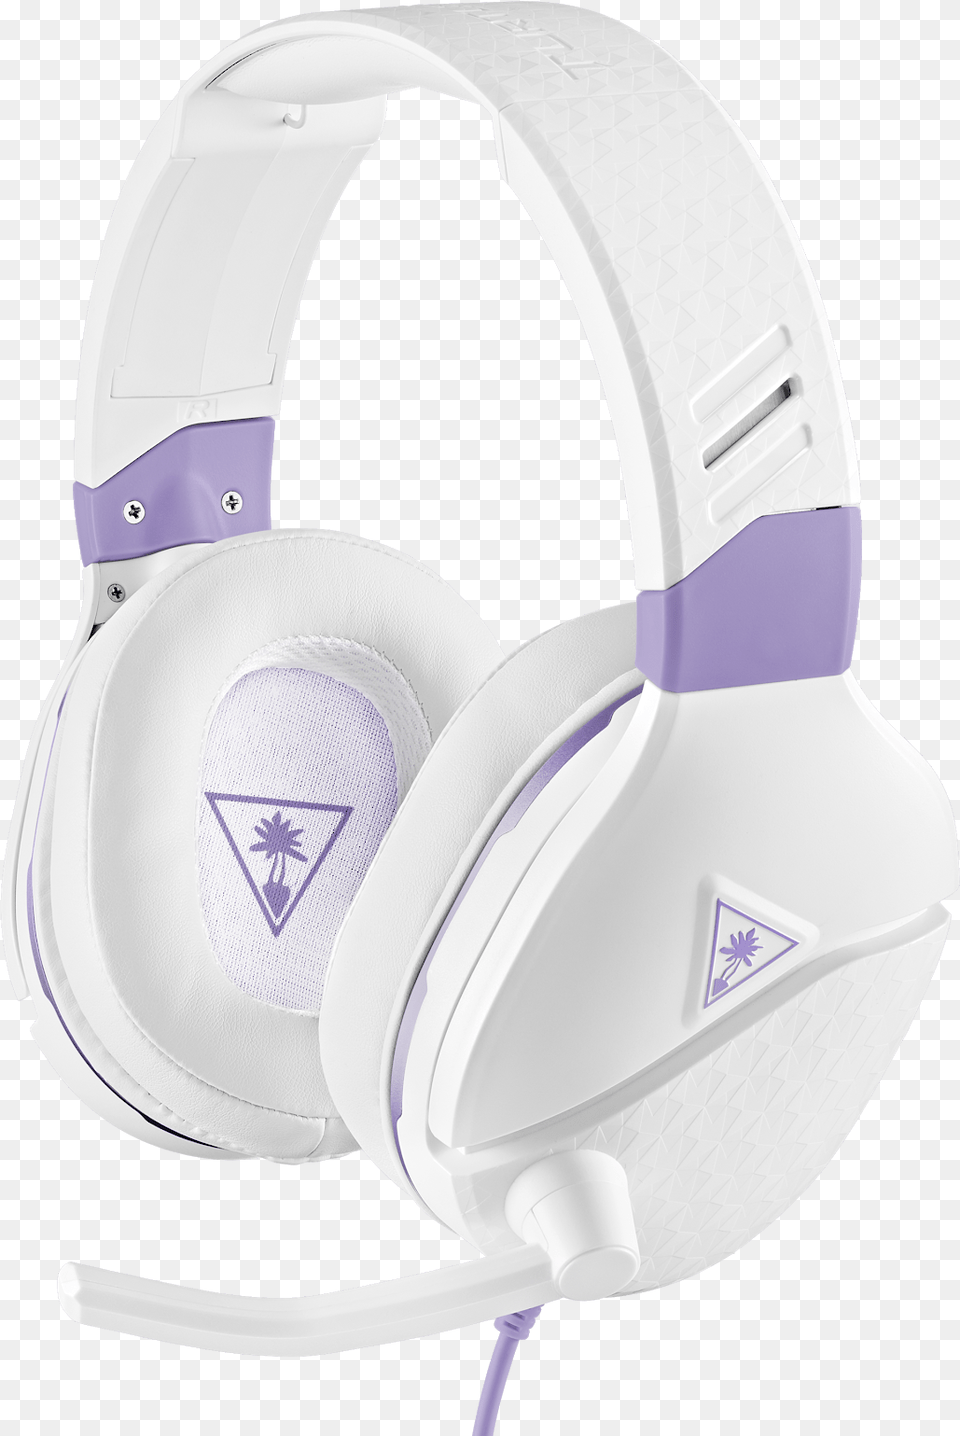 White And Purple Turtle Beach Headset, Electronics, Headphones, Clothing, Hardhat Free Png Download